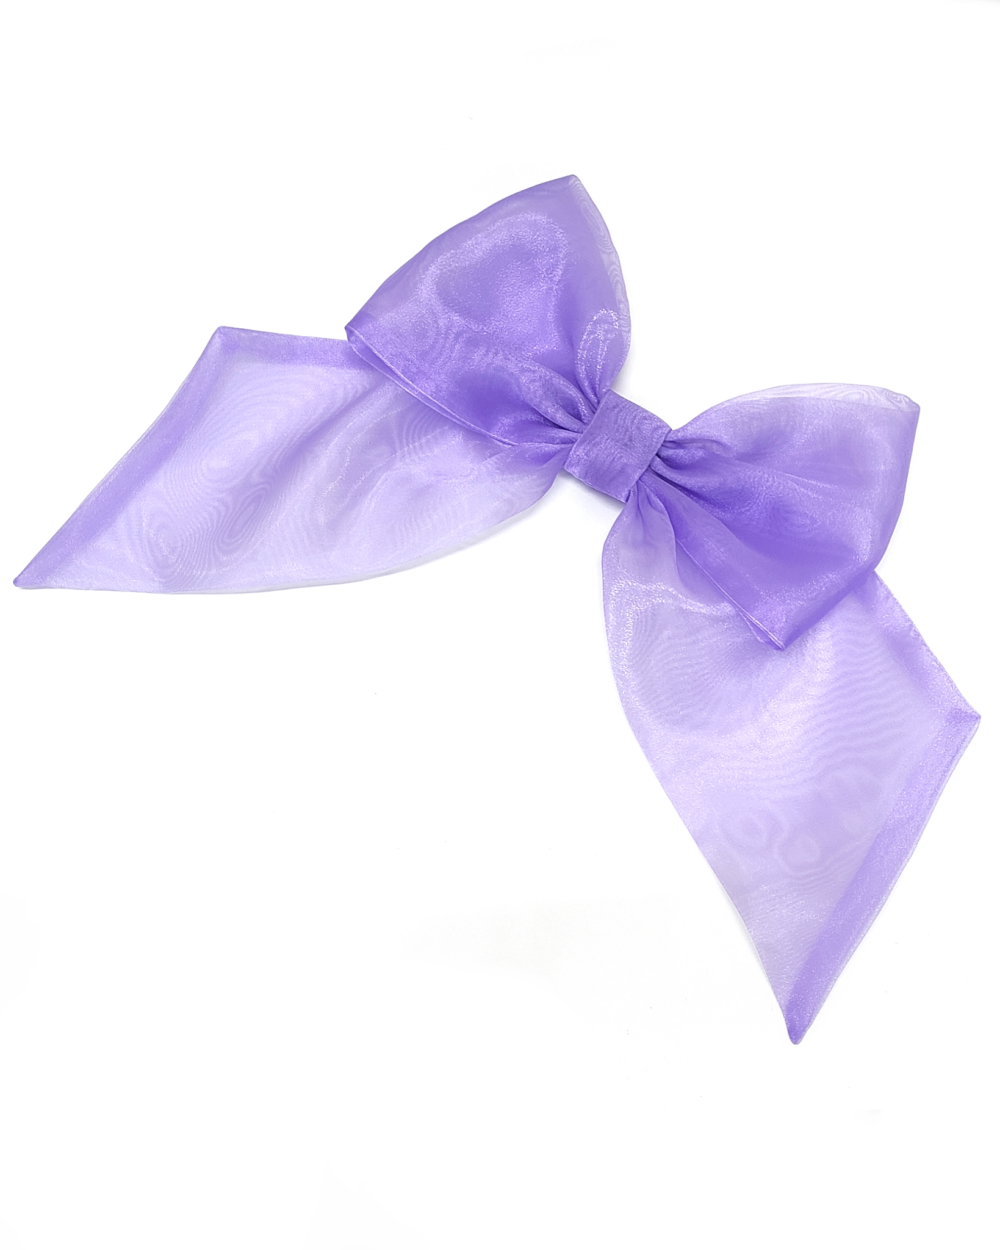 Lavender brooch in the shape of a giant bow made of organza by melikestea.